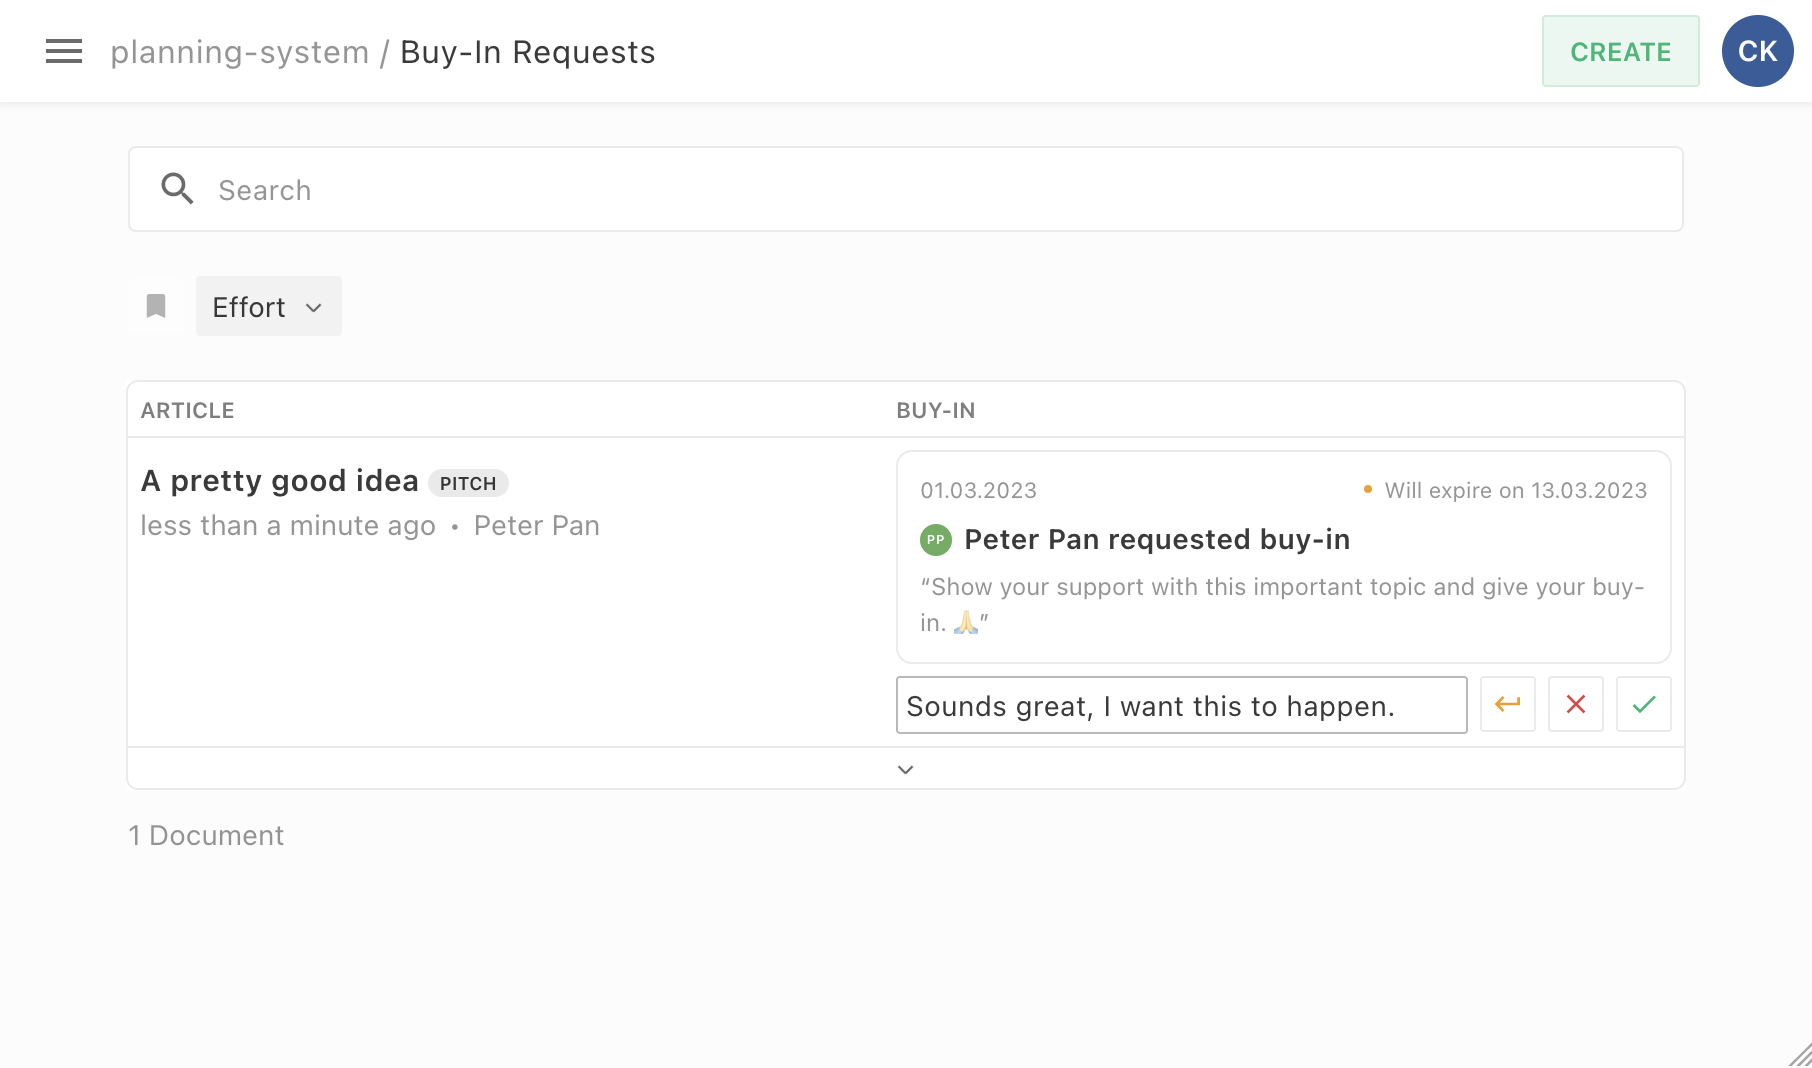 A screenshot of a Table Dashboard where users can see the buy-in request details and can directly respond.